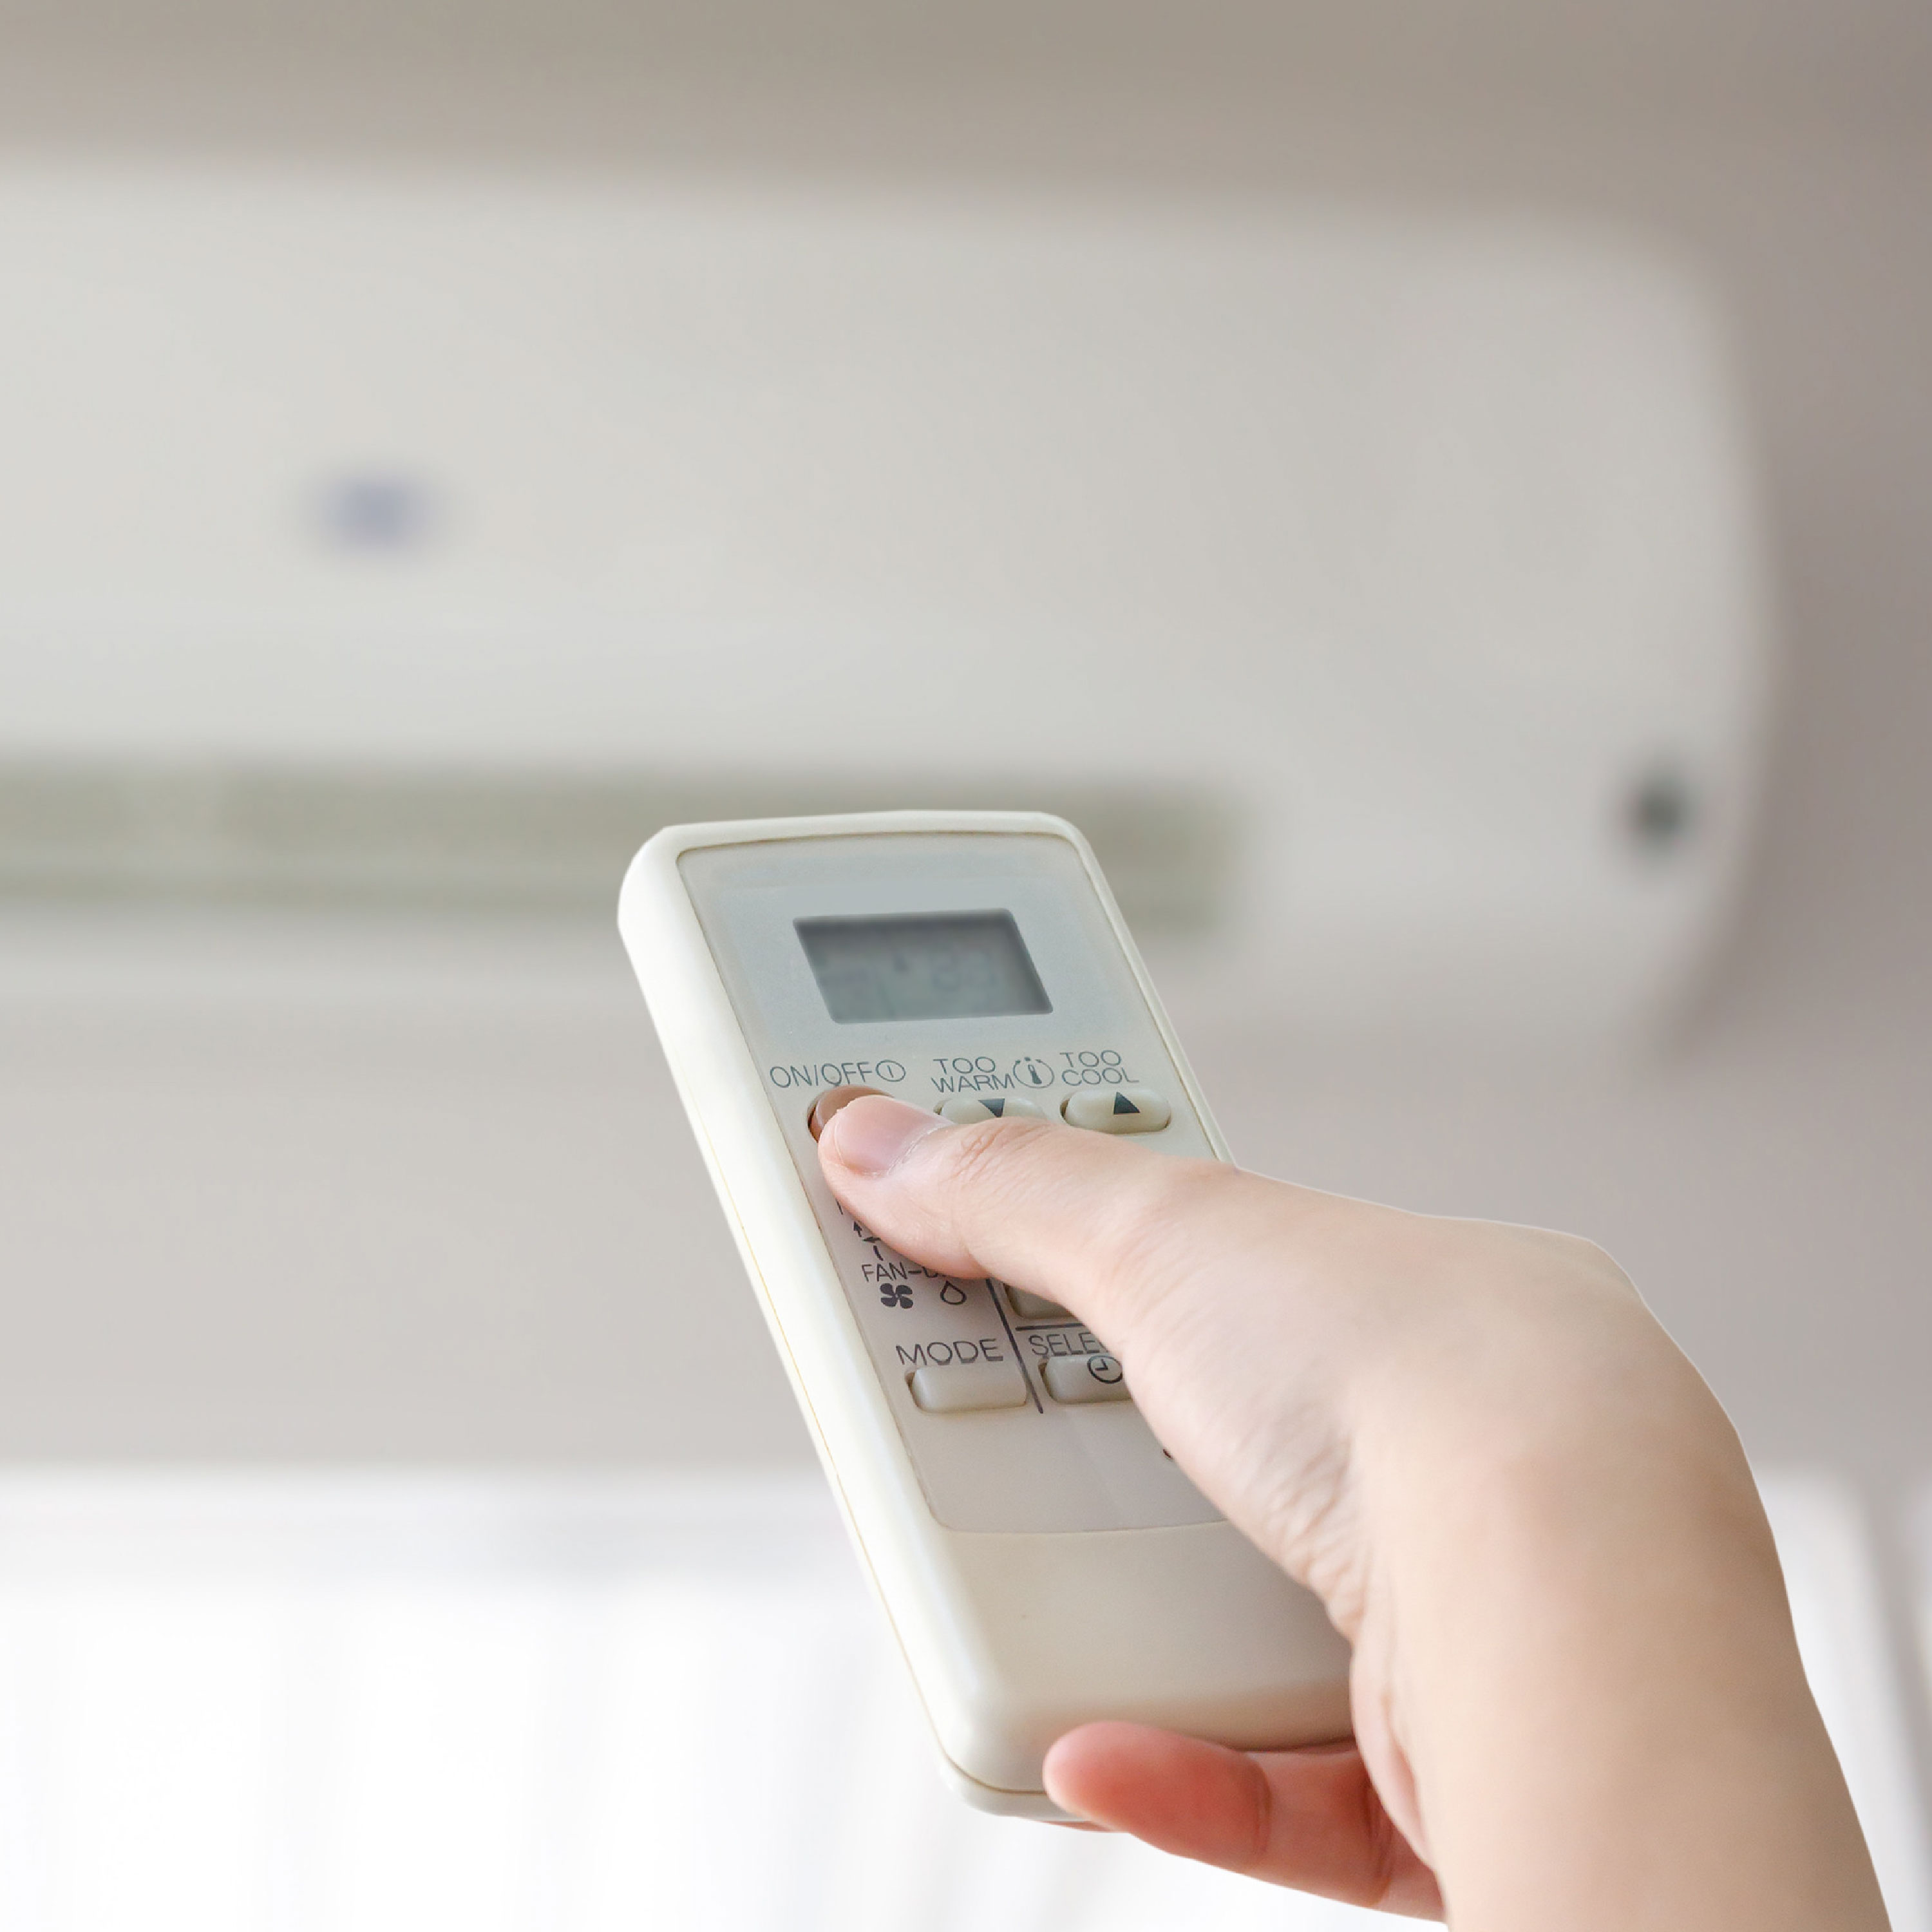 Stay in a low humidity environment, such as: indoor places with air-conditioning or heating, or exposure to sunlight